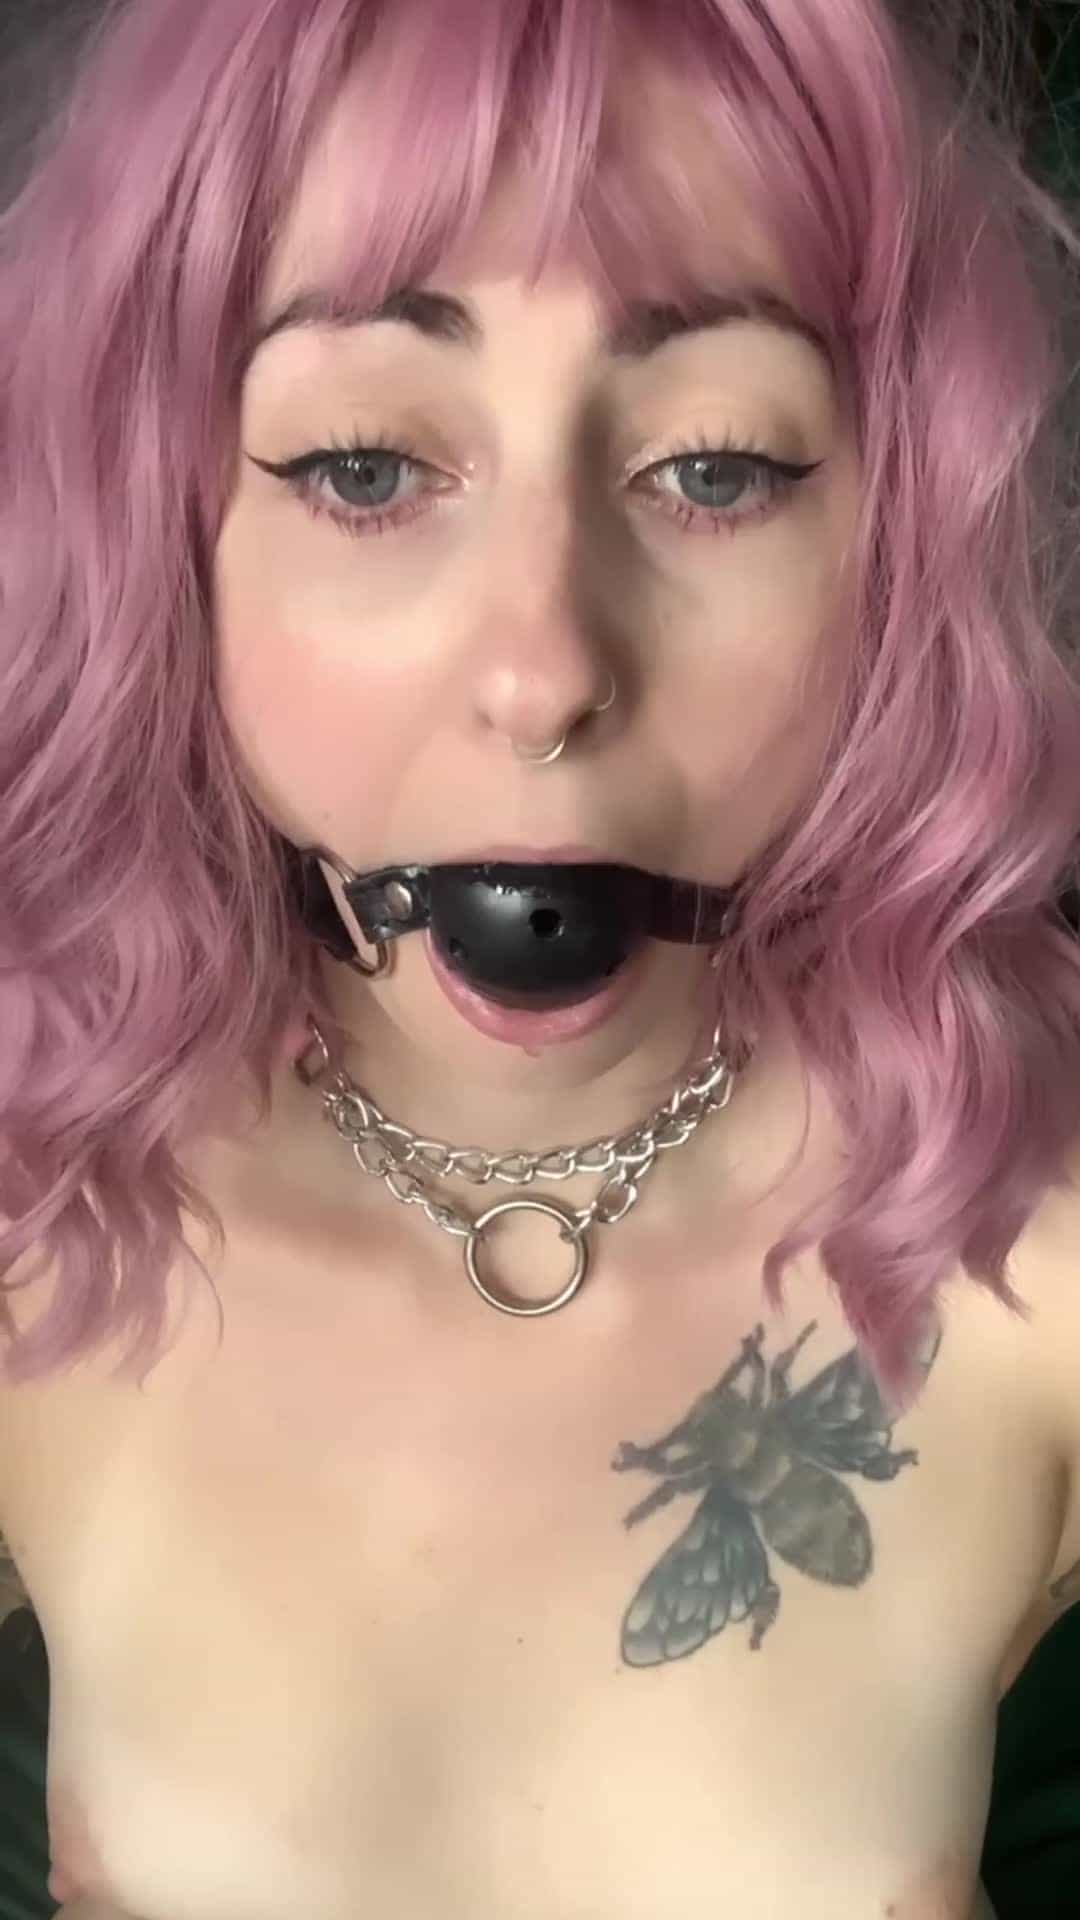 Brats get gagged and plugged. The question is, what size plug to use? [f] 